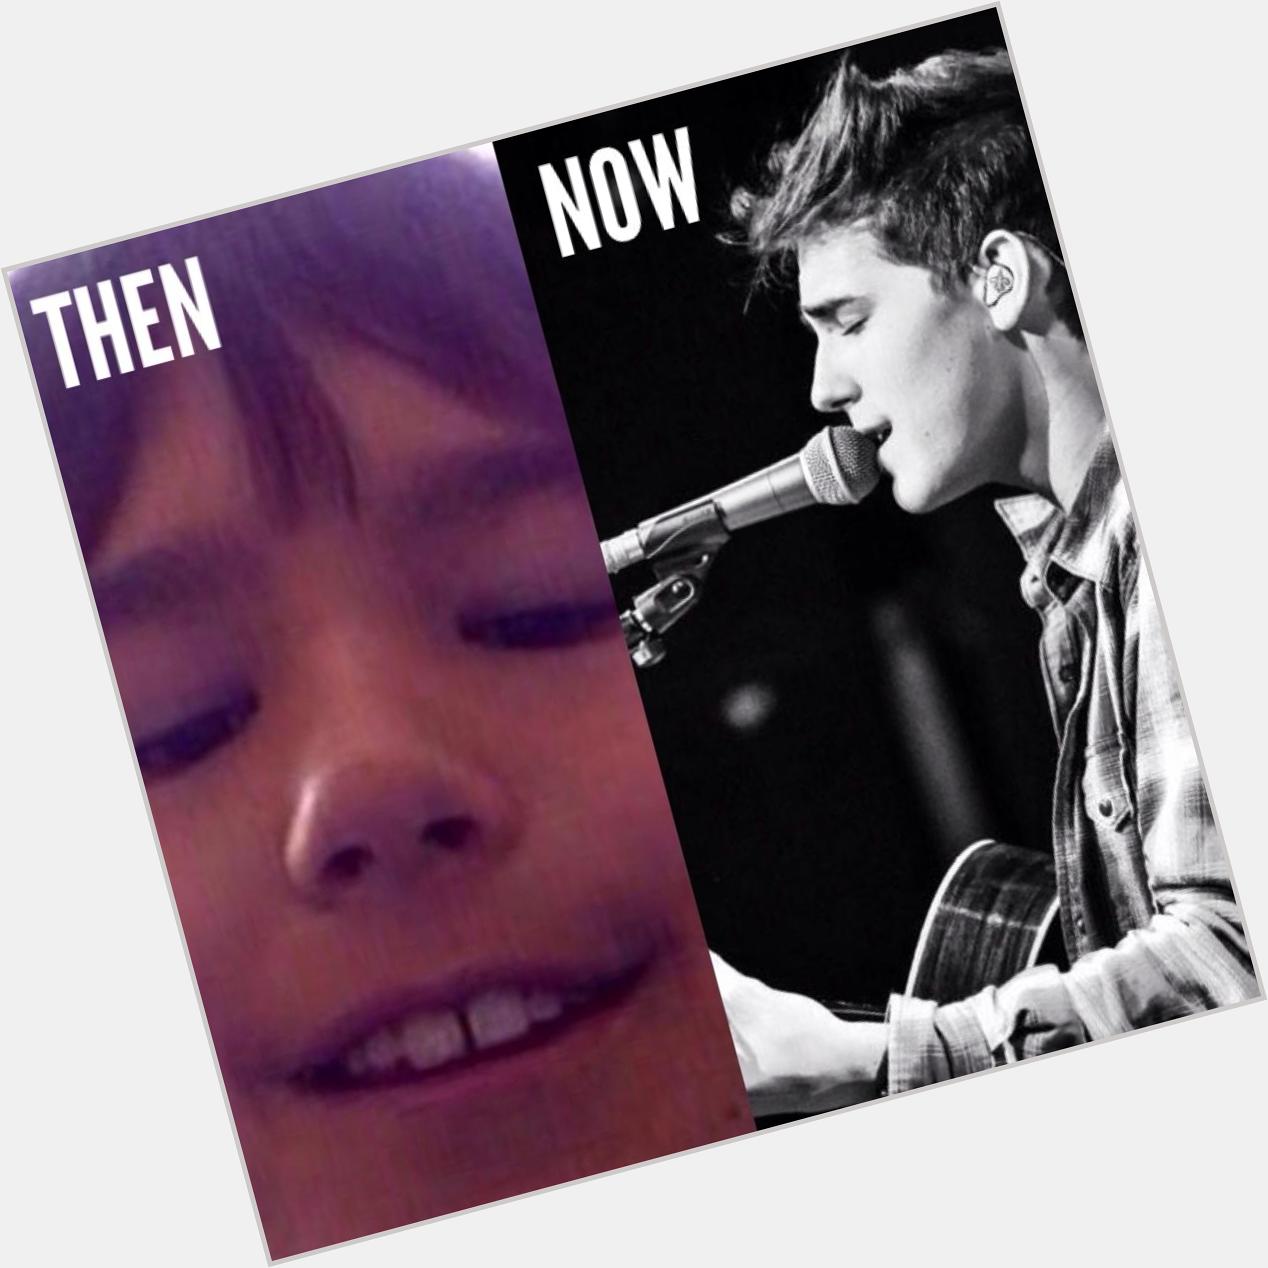 FEEL OLD YET??? HAPPY 17TH BDAY TO THE KING OF TRANSFORMATION TUESDAY THE JACOB WHITESIDES 